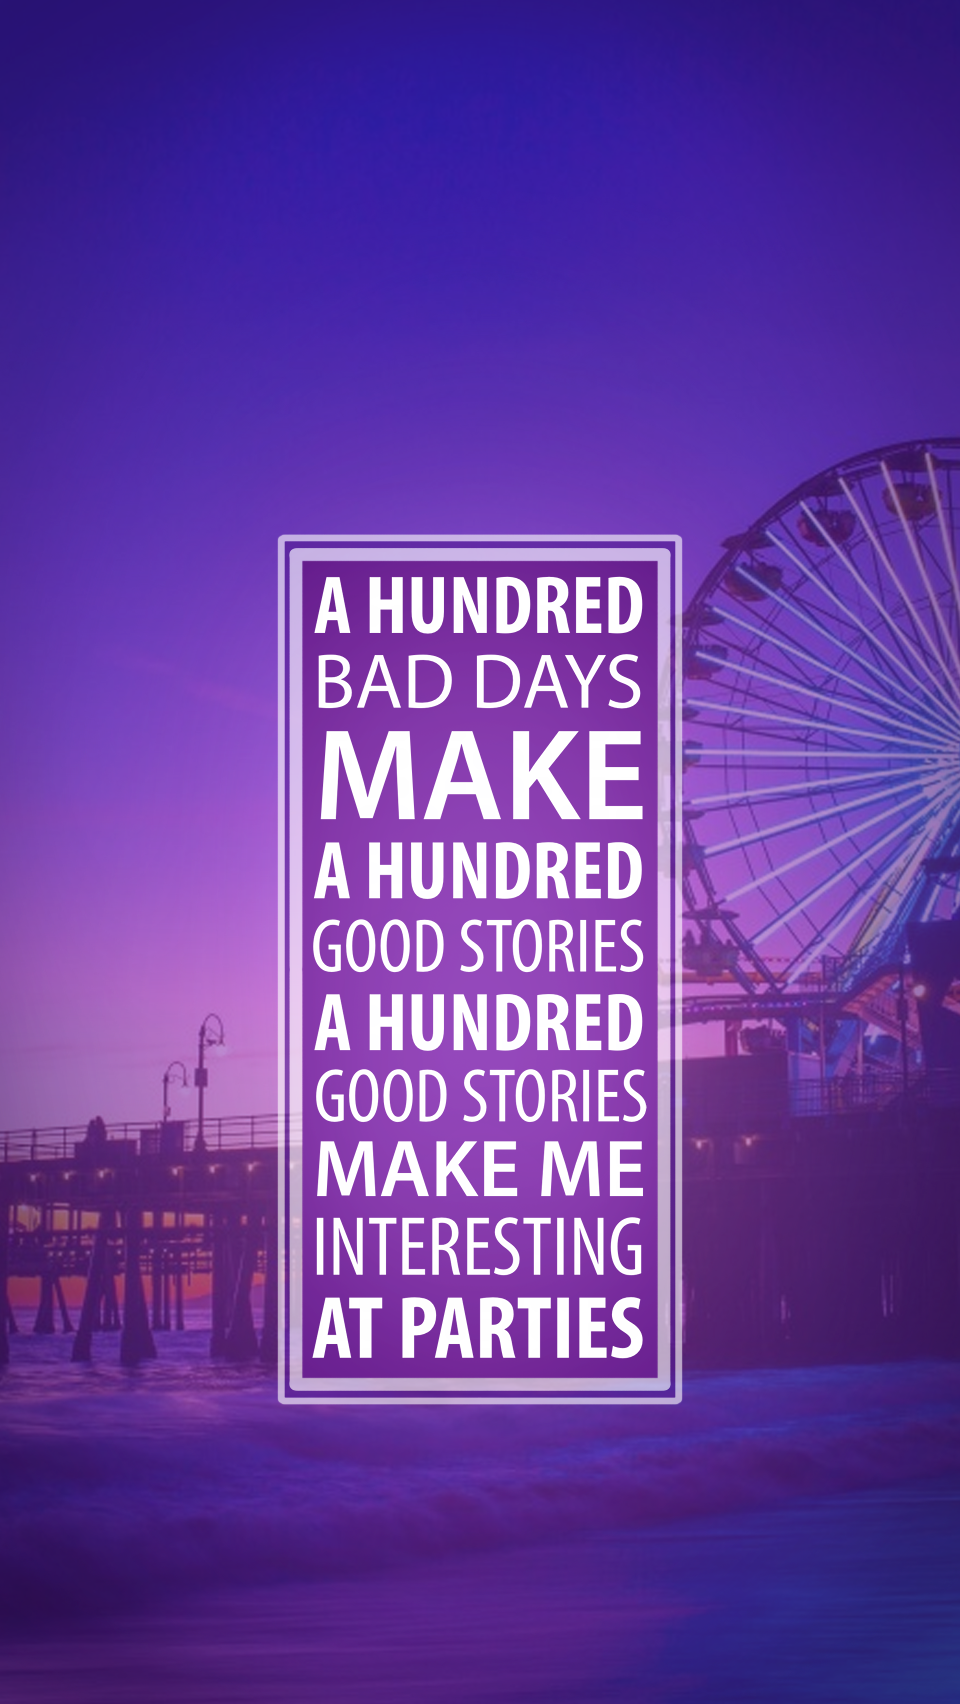 lyric lockscreens for AJR's 100 bad days, by - just another